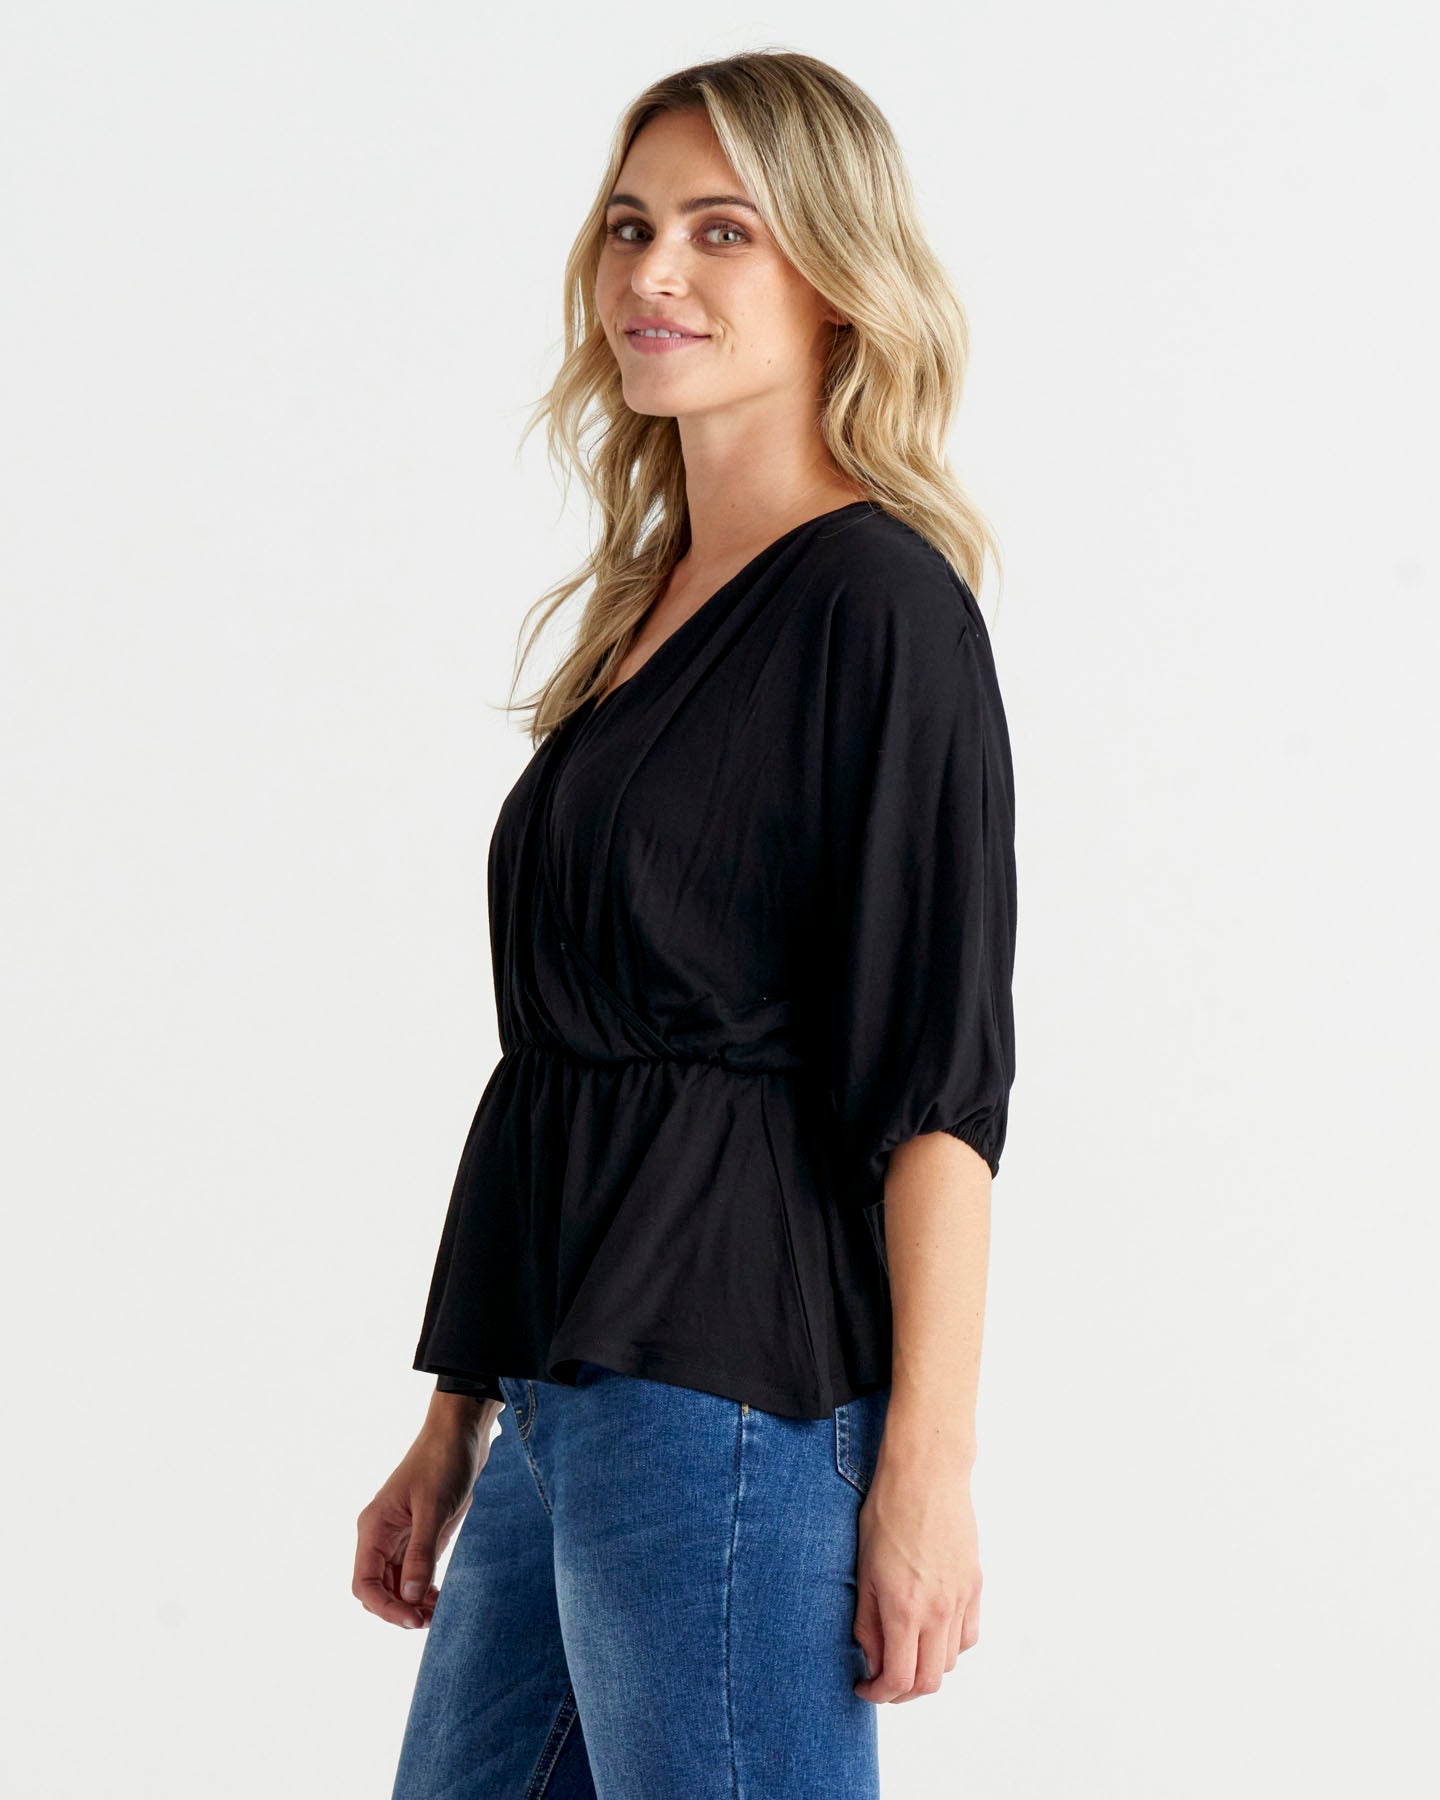 Bayeaux Wrap Top - Black | Betty Basics | The Bayeaux Top combines a classic shape with a comfortable fit, making this the go to when pairing with your fave bottoms
Features:

Faux wrap (breastfeeding friend